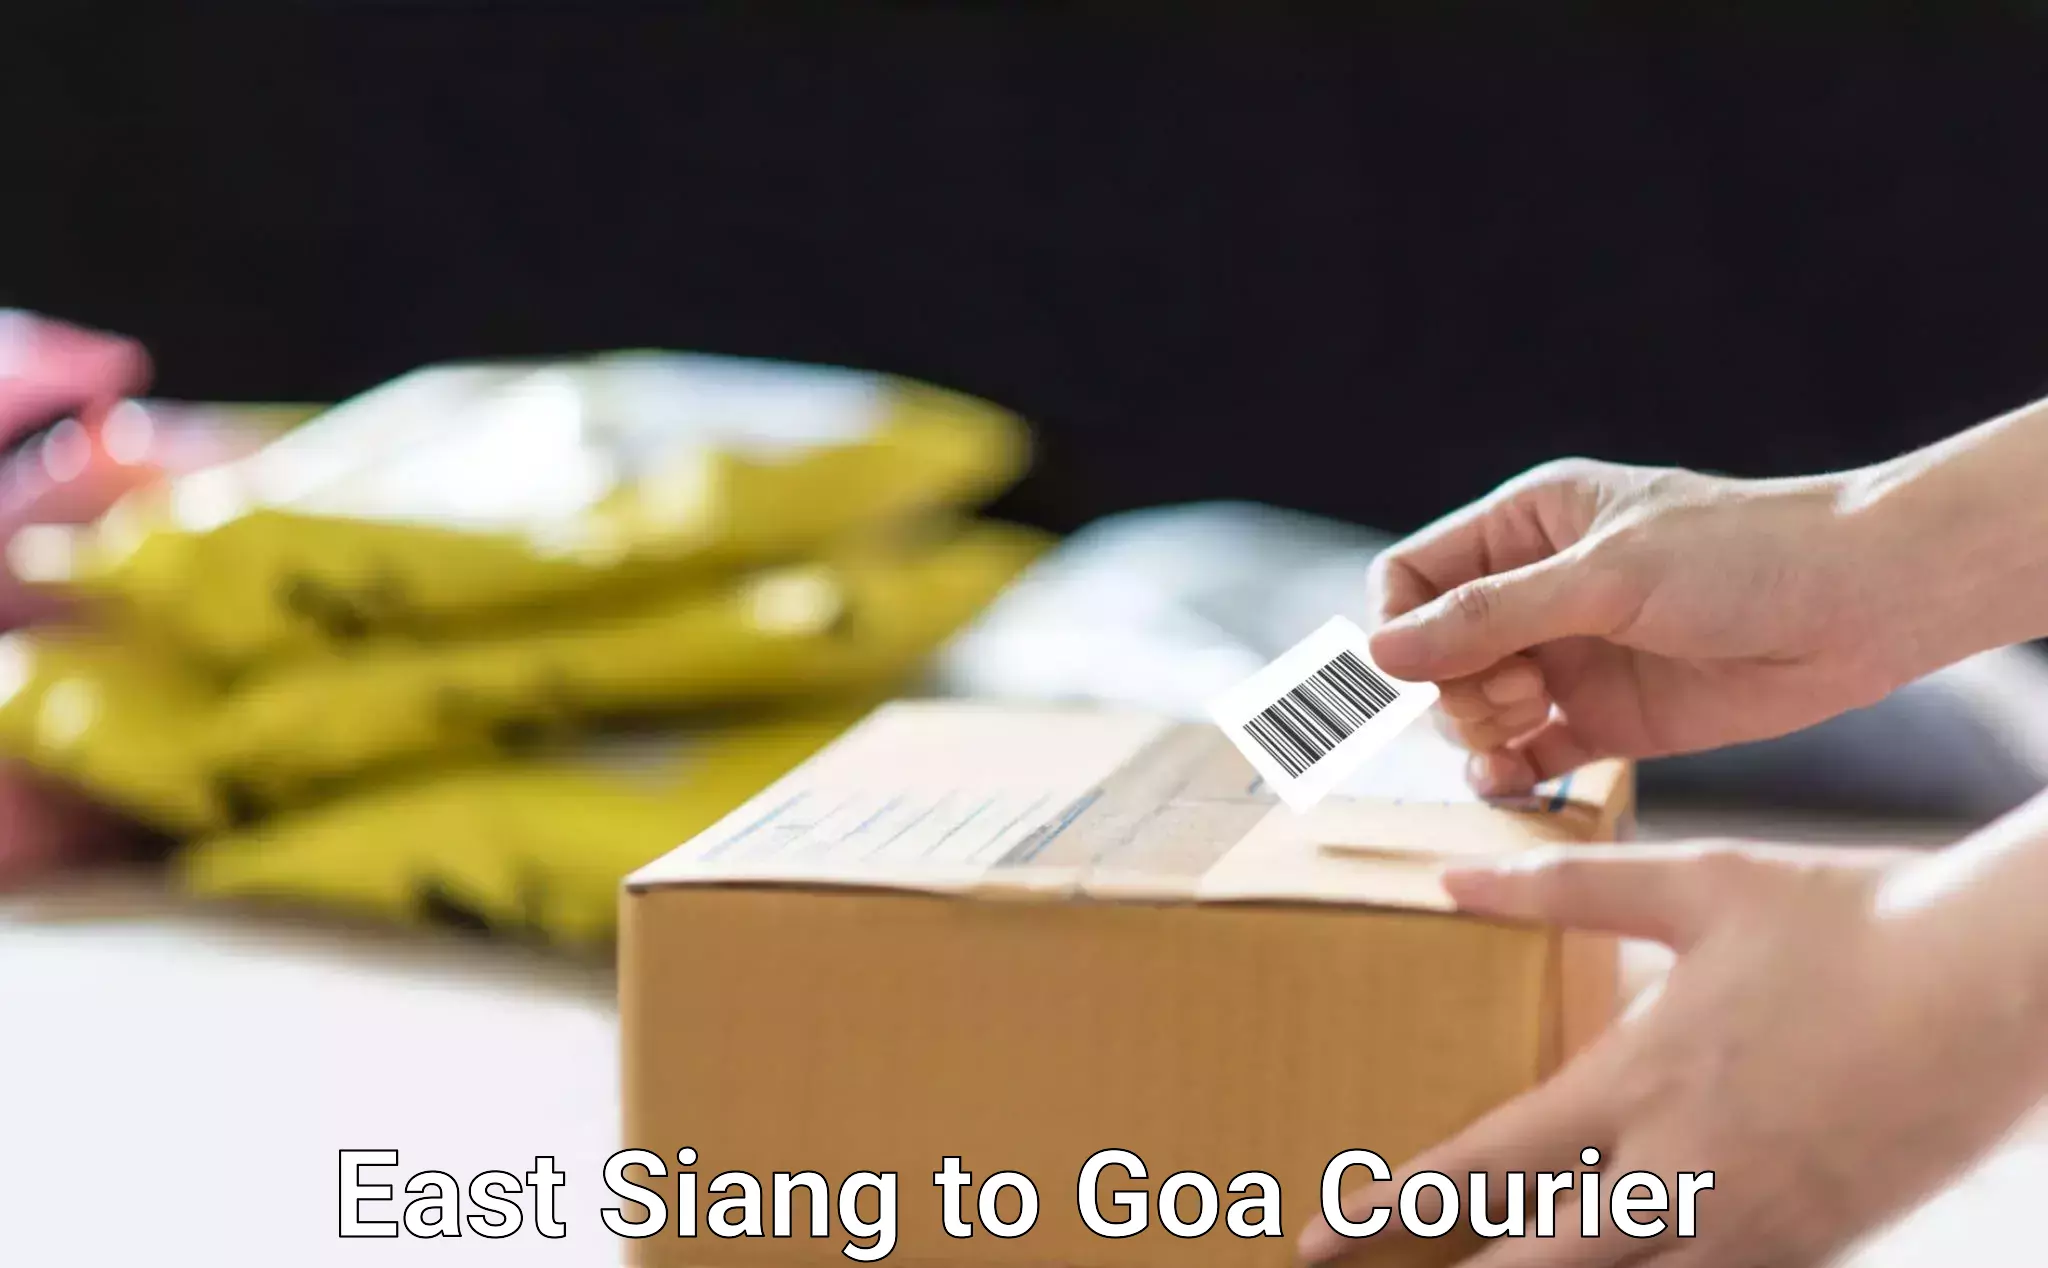 Online shipping calculator East Siang to Goa